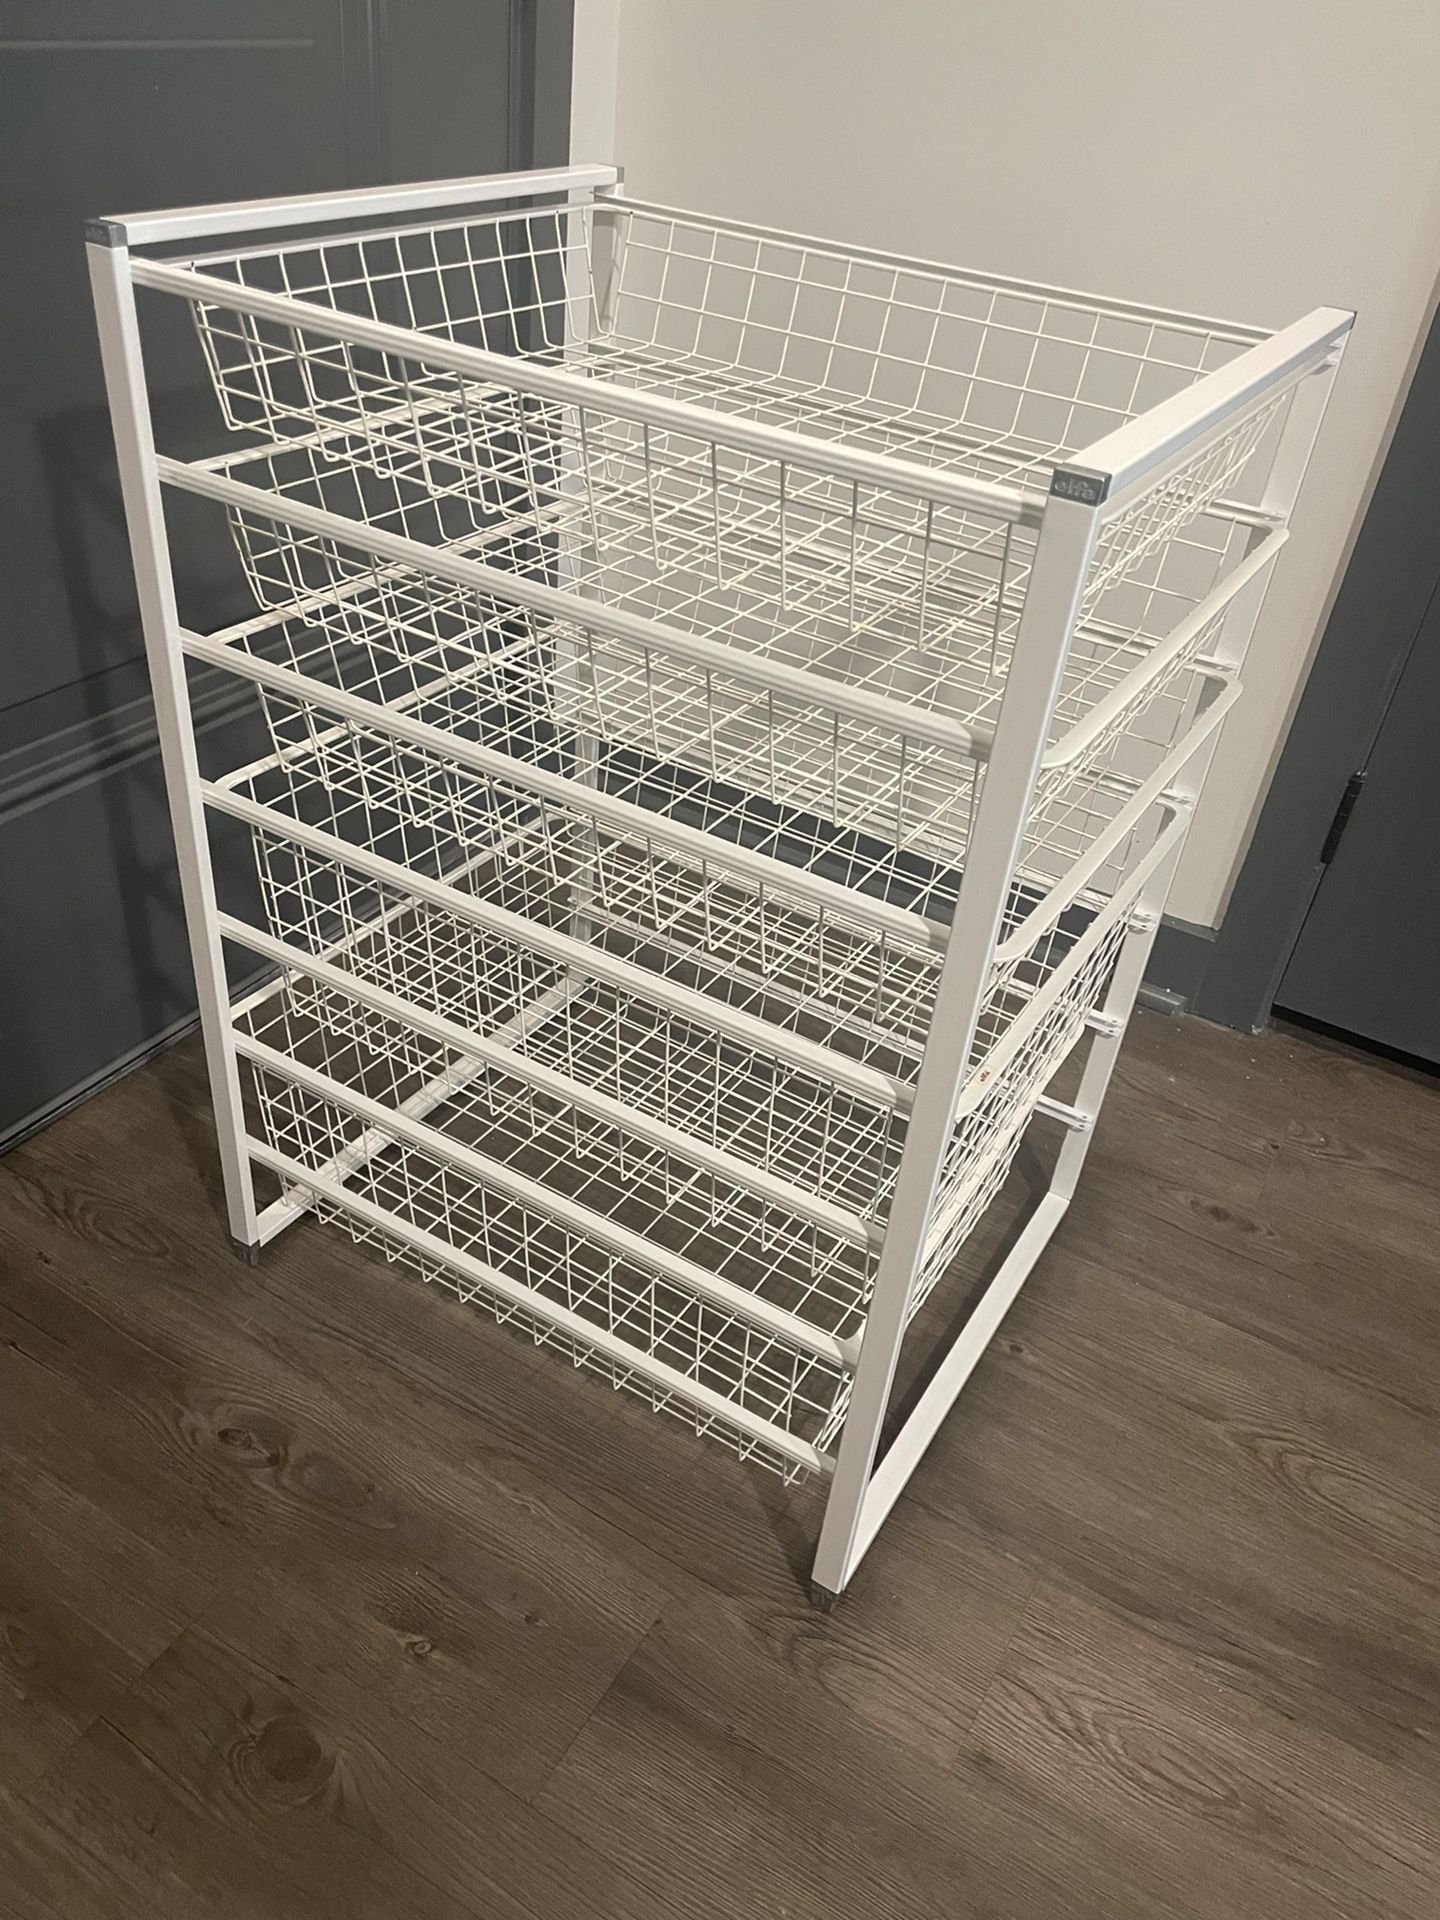 Elfa Platinum Wide Drawer Solution for Sale in Seattle, WA - OfferUp